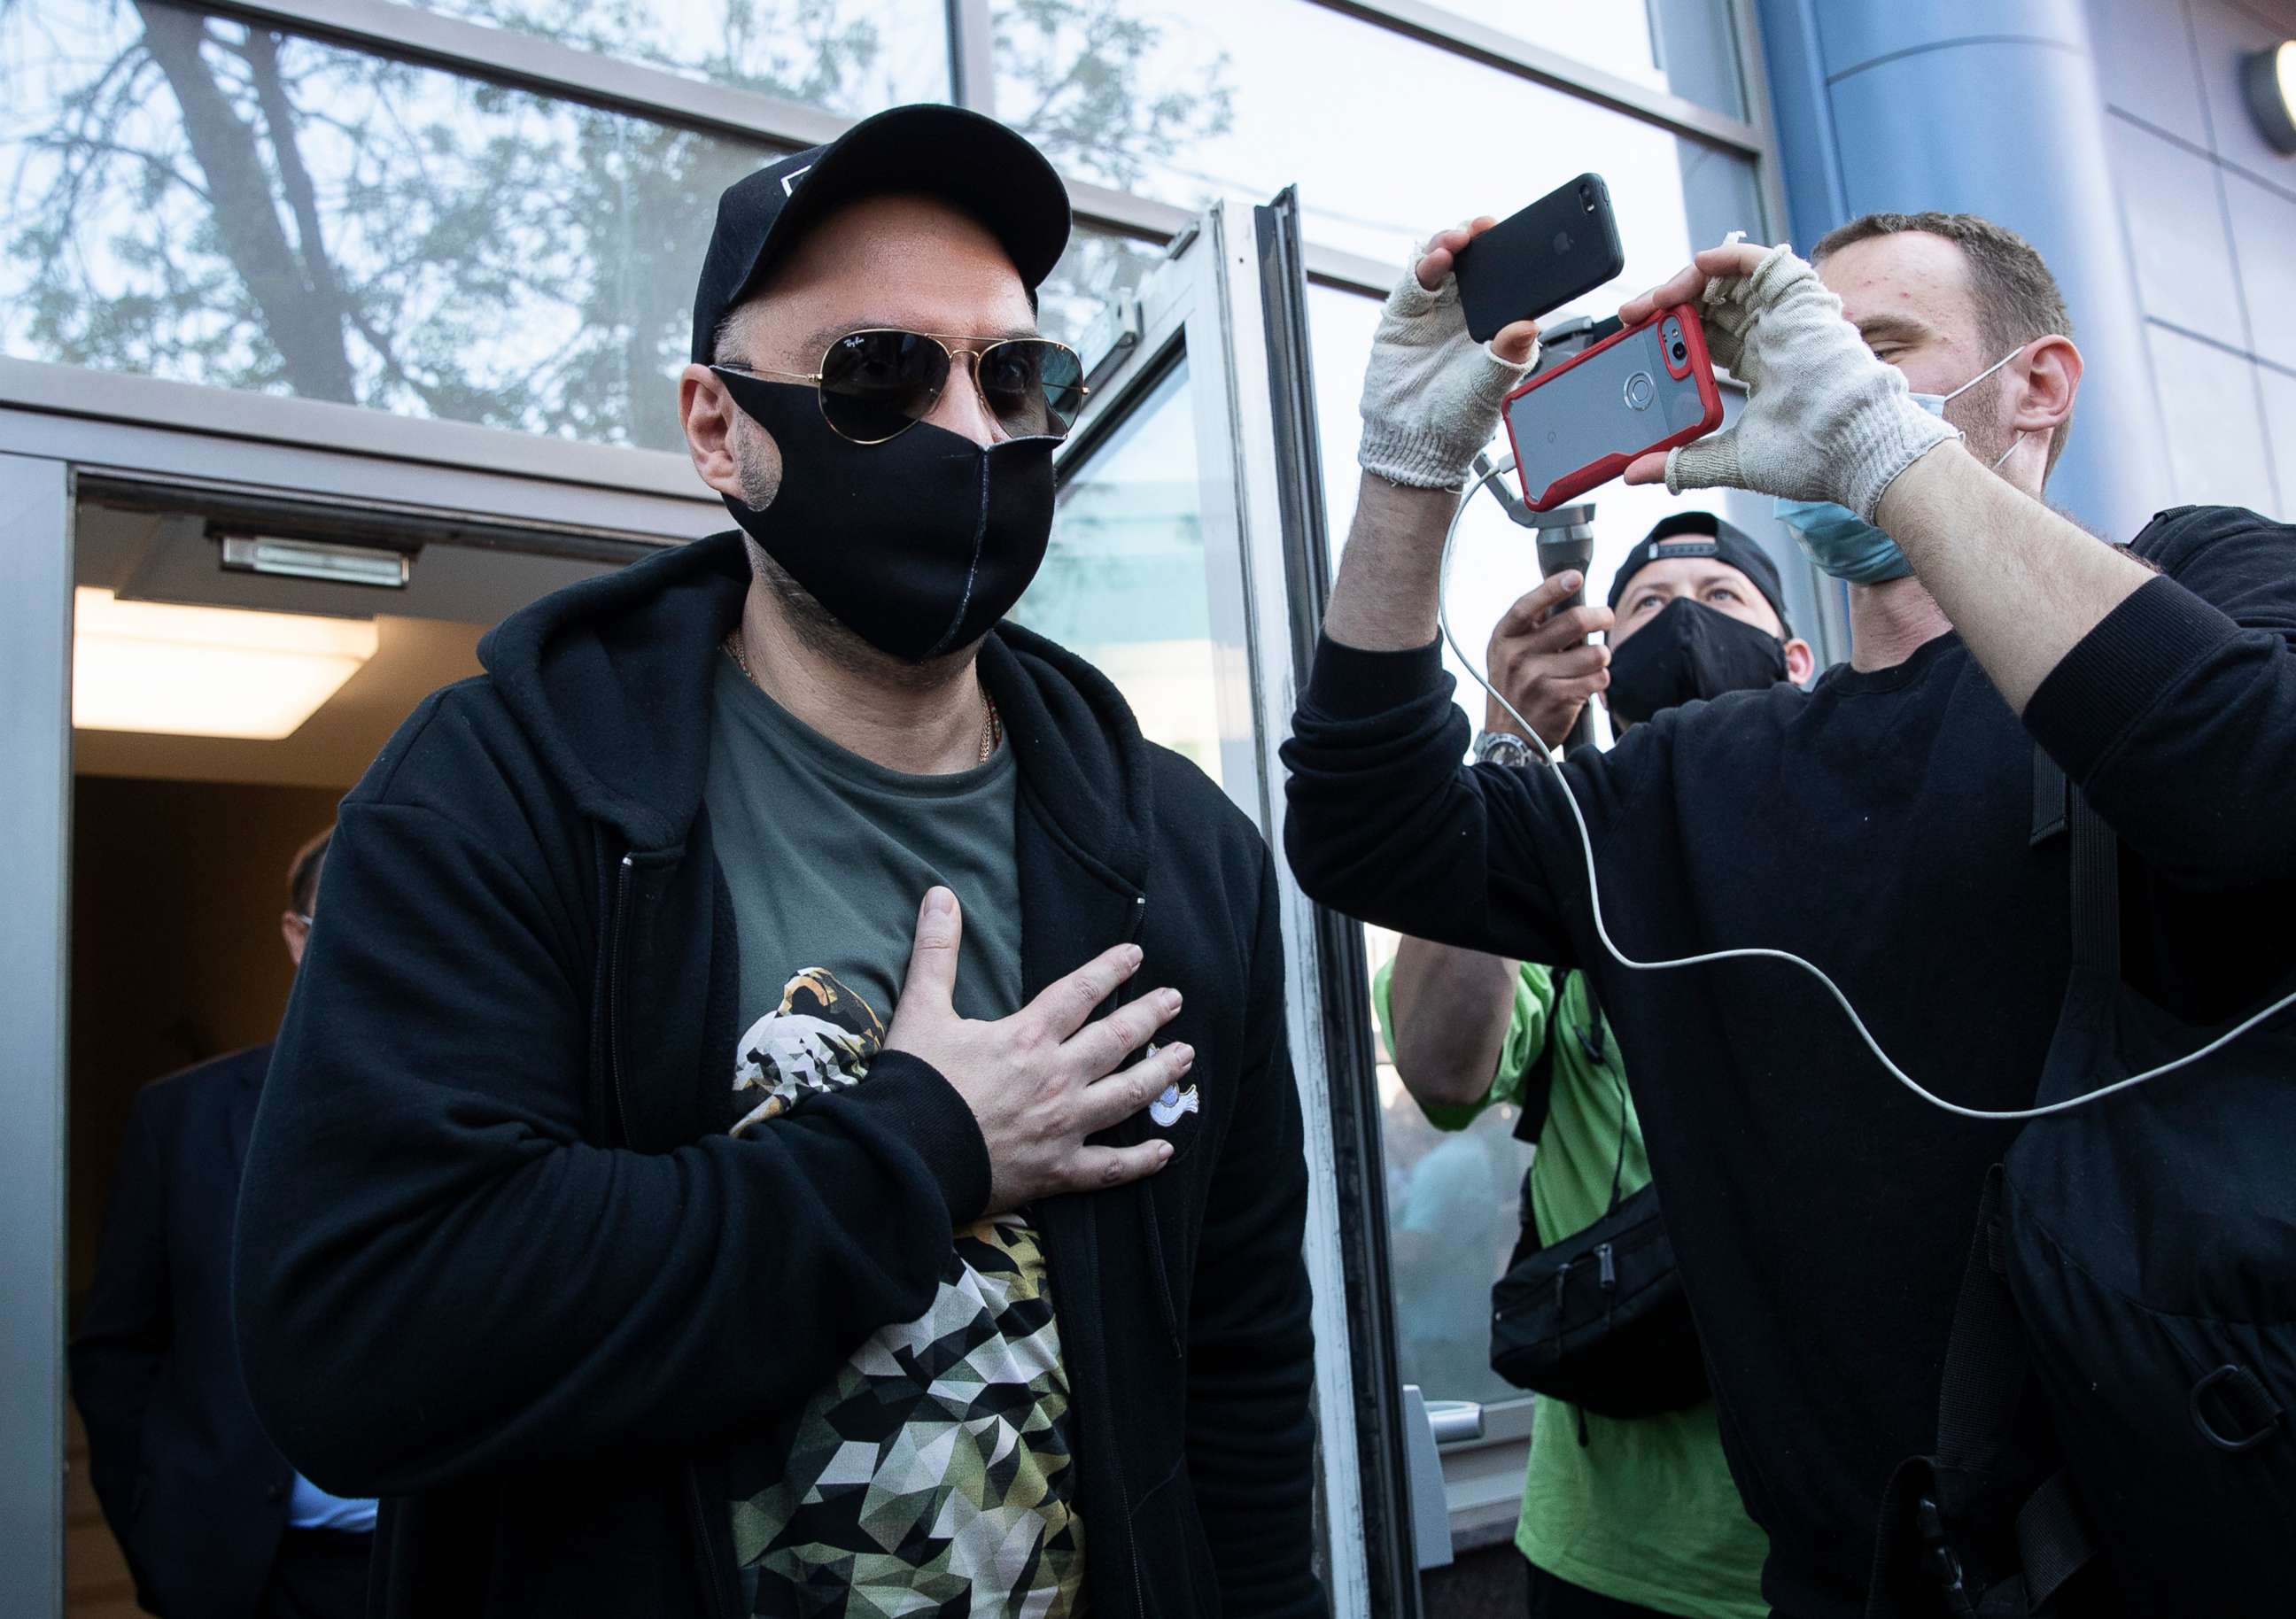 PHOTO: Russian film and theater director Kirill Serebrennikov, wearing a face mask to protect against coronavirus, leaves the Meshchansky court after hearings in Moscow, June 26, 2020.